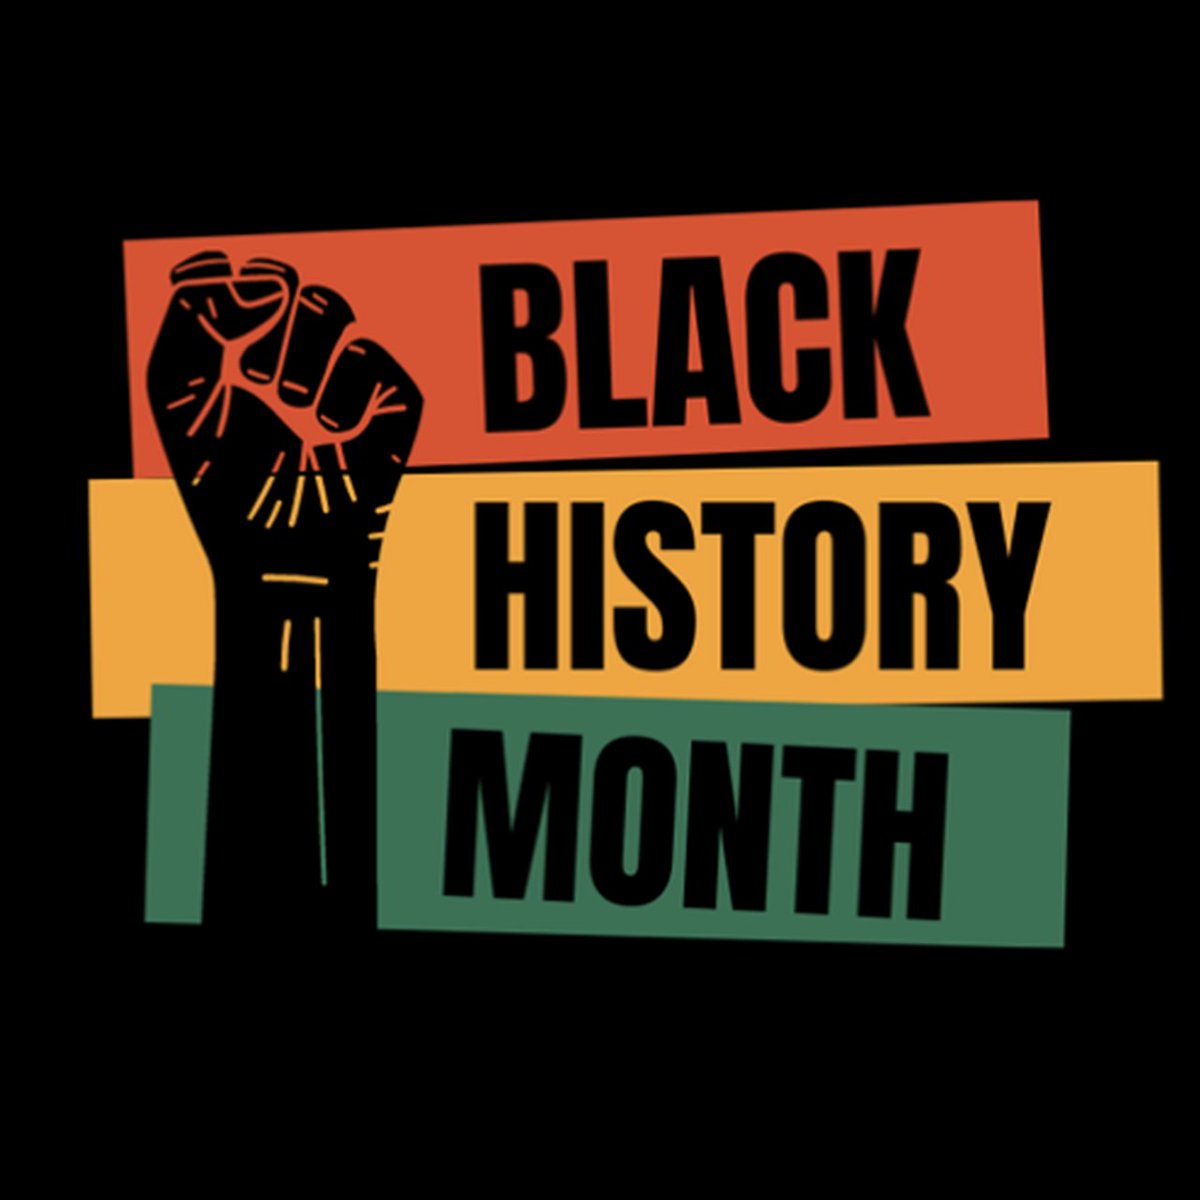 Happy Black History Month!! This year’s celebration will honour the exceptional achievements of black women. #TeamUHDB #BlackHistoryMonth